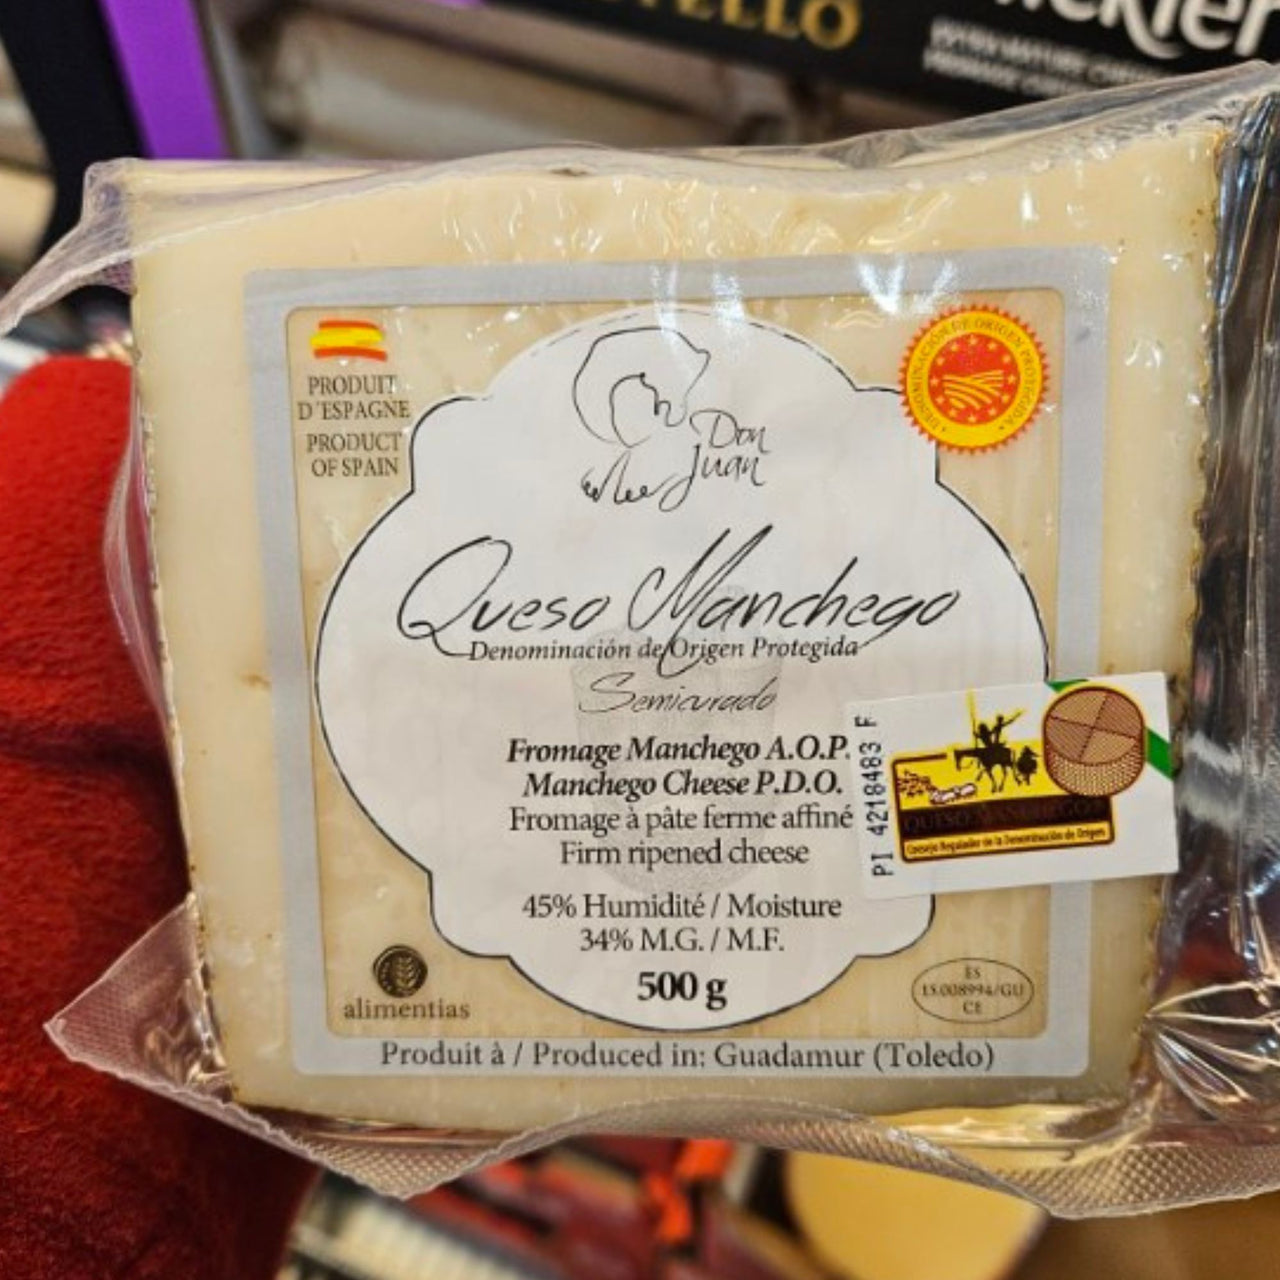 Image of Don Juan Manchego Dop Cheese